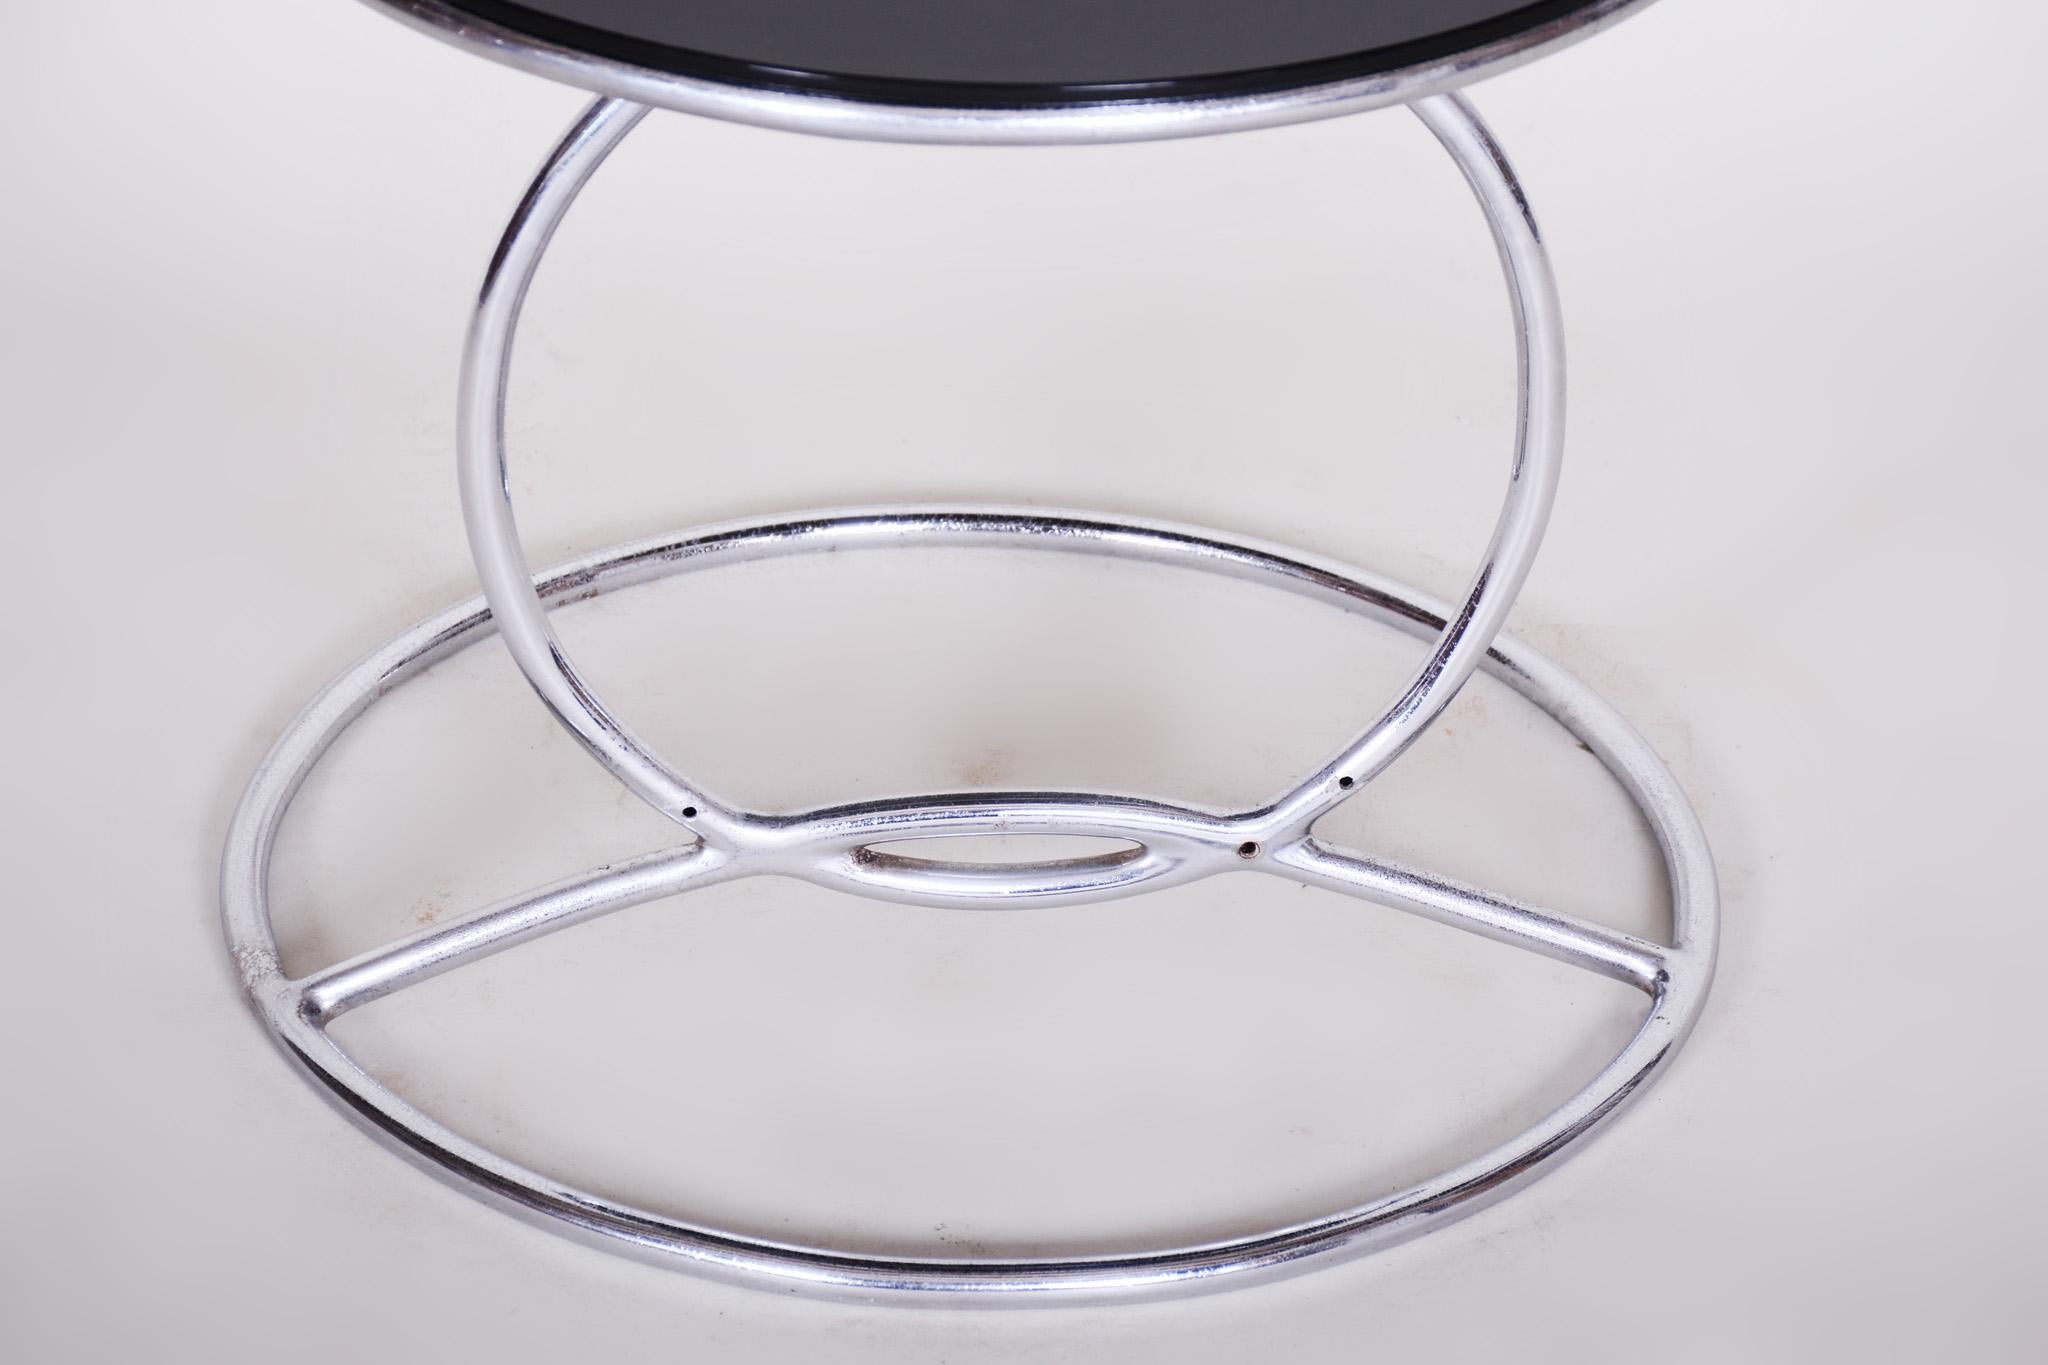 Unusual Chrome Bauhaus Round Small Table, 1950s, Perfect Condition, Black glass 2